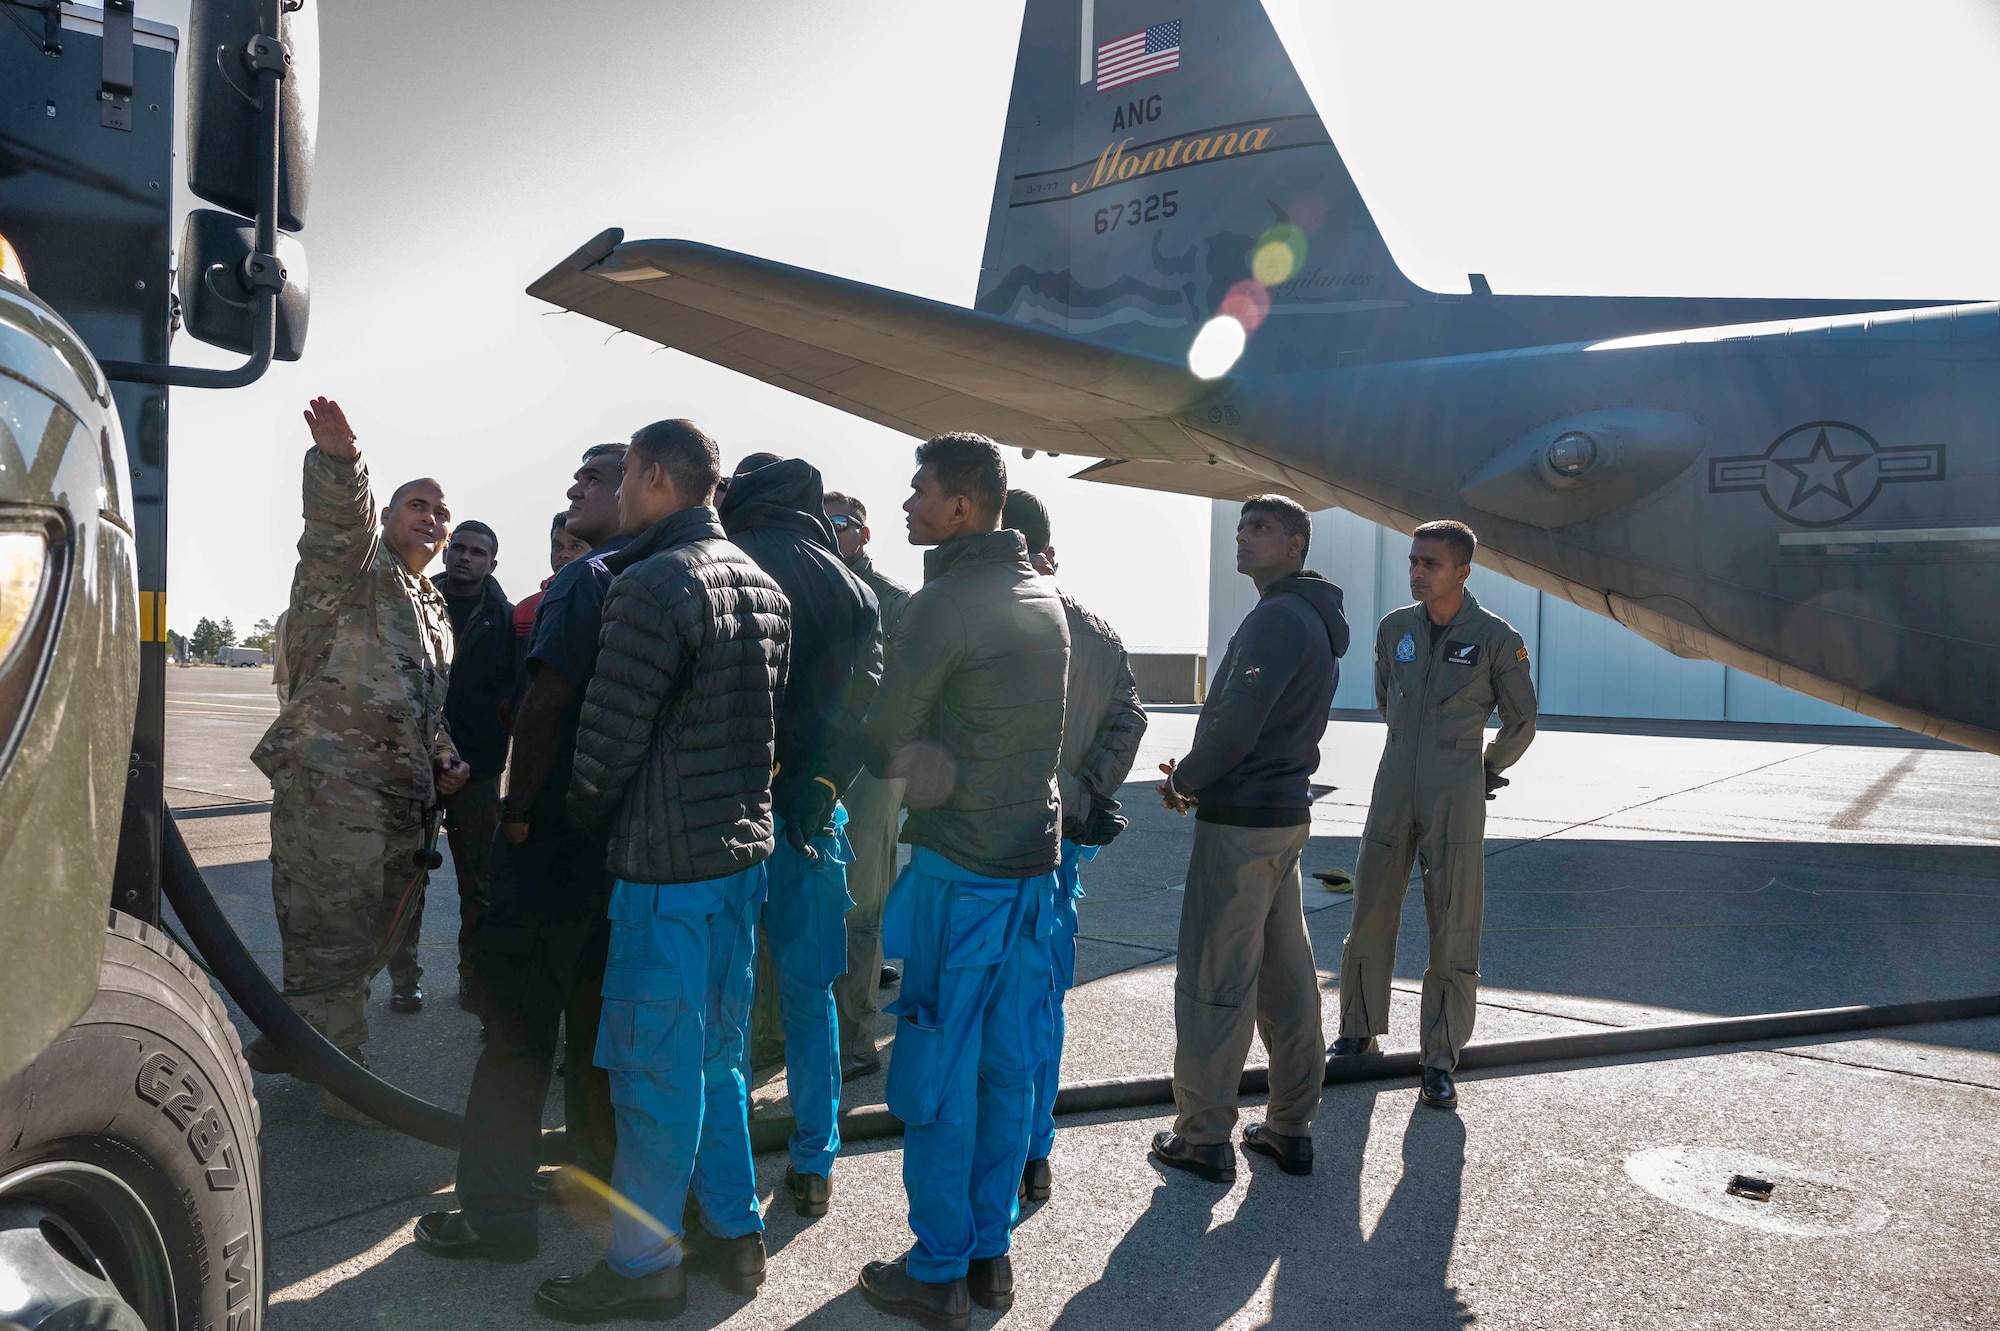 Master Sgt. Mark Payton, 120th Logistics Readiness Squadron, aircraft fuels technician, briefs Sri Lanka Air Force members on aircraft refueling procedures at the Montana Air National Guard Base, Great Falls, Montana, Sept. 9, 2022.